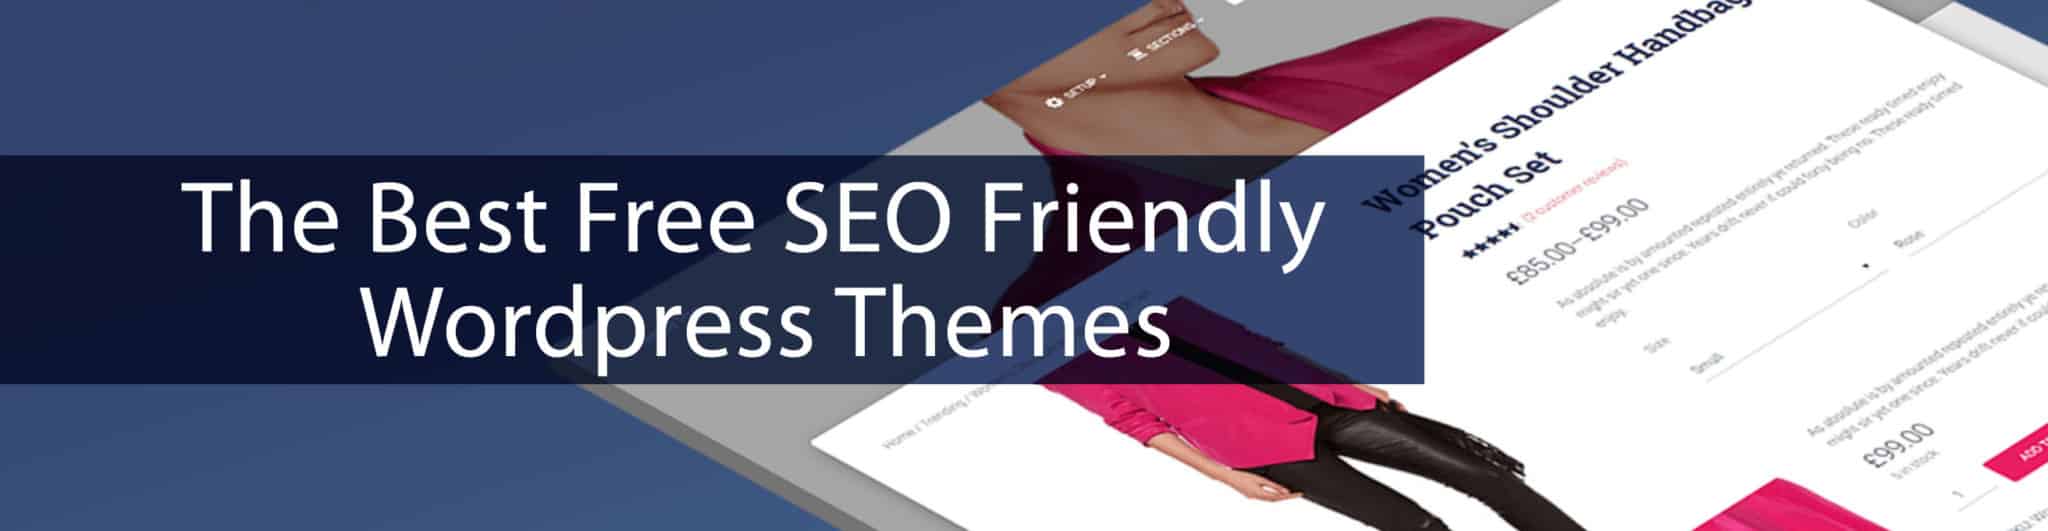 What Are the Best Free SEO Friendly WordPress Themes?